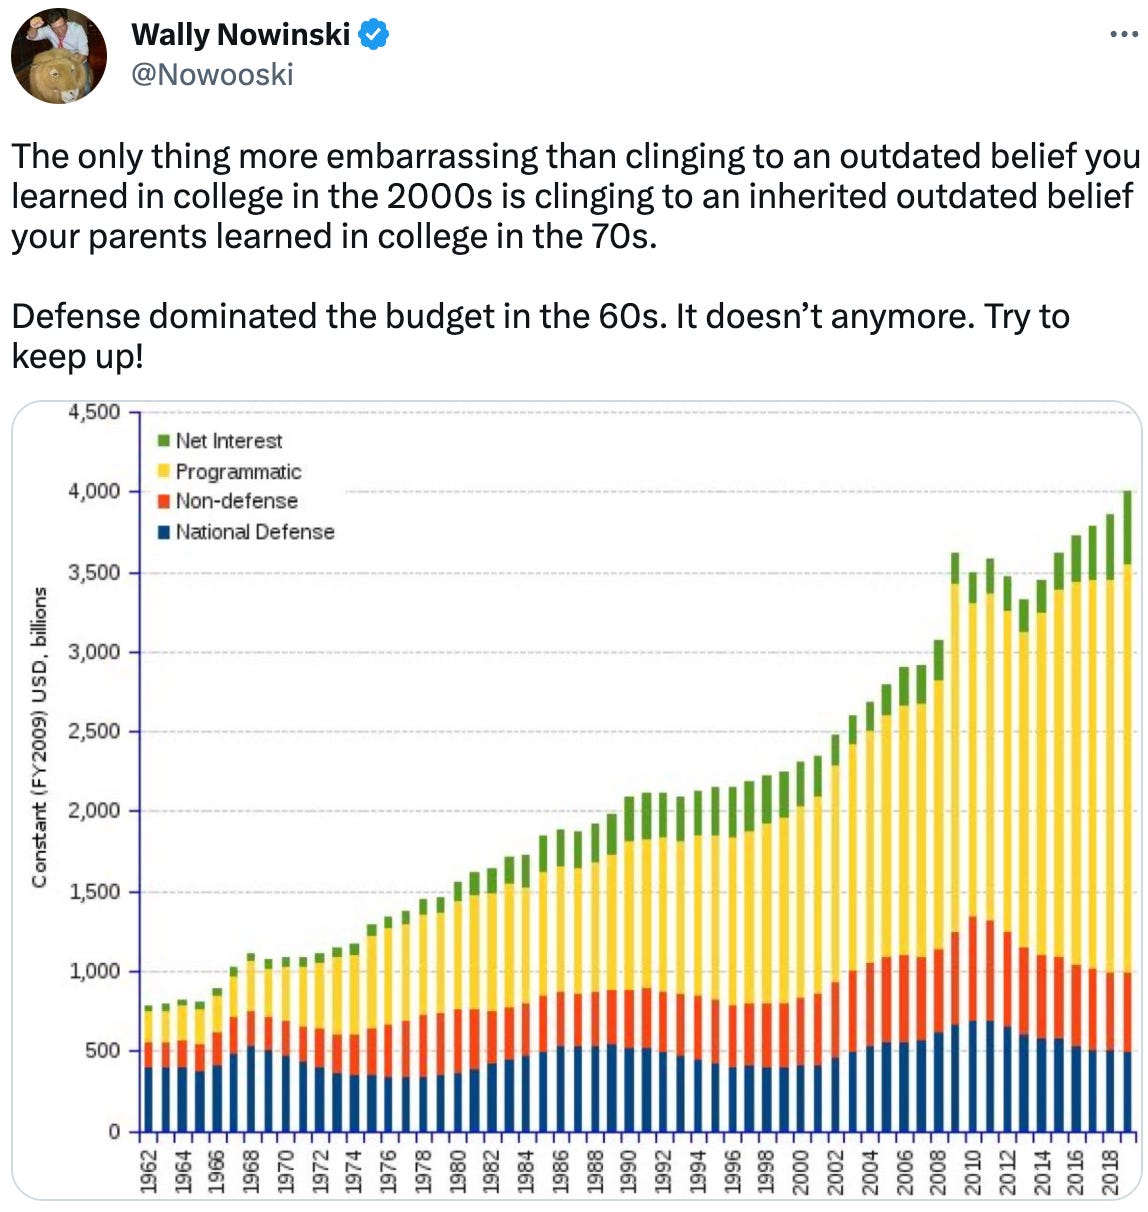  Wally Nowinski @Nowooski The only thing more embarrassing than clinging to an outdated belief you learned in college in the 2000s is clinging to an inherited outdated belief your parents learned in college in the 70s.   Defense dominated the budget in the 60s. It doesn’t anymore. Try to keep up!